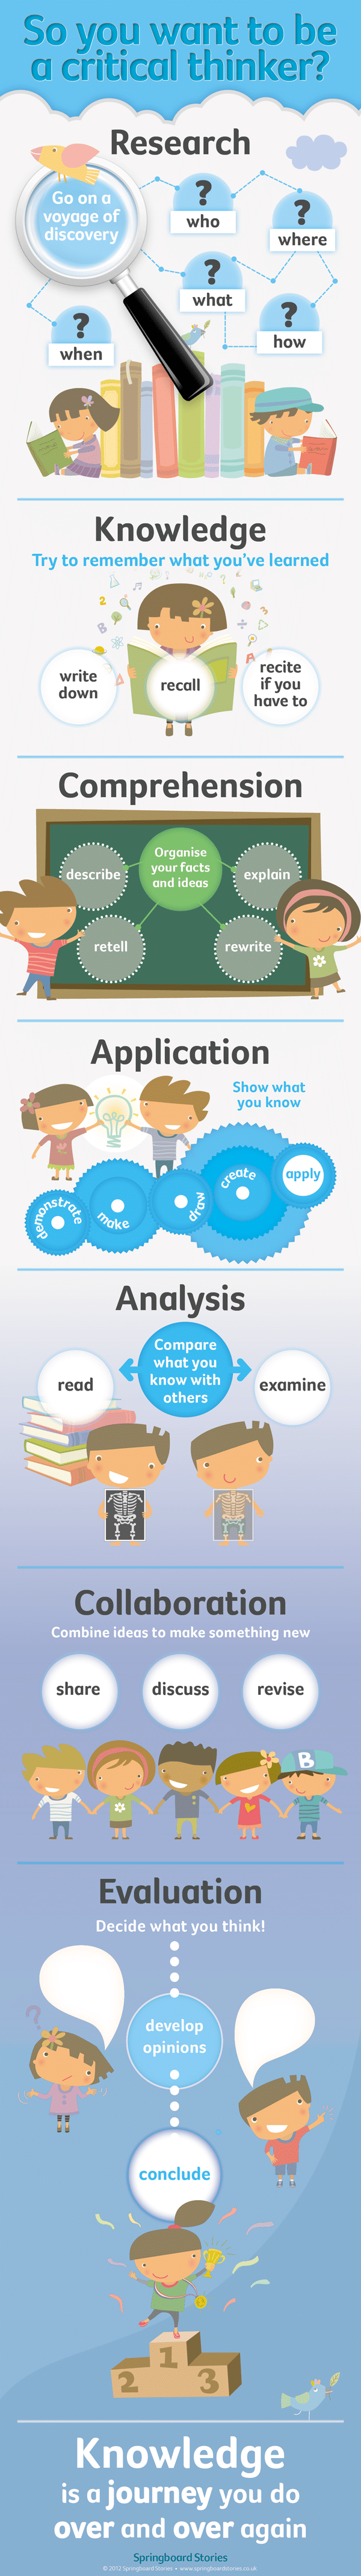 SS-Critical-thinker-infographic-1